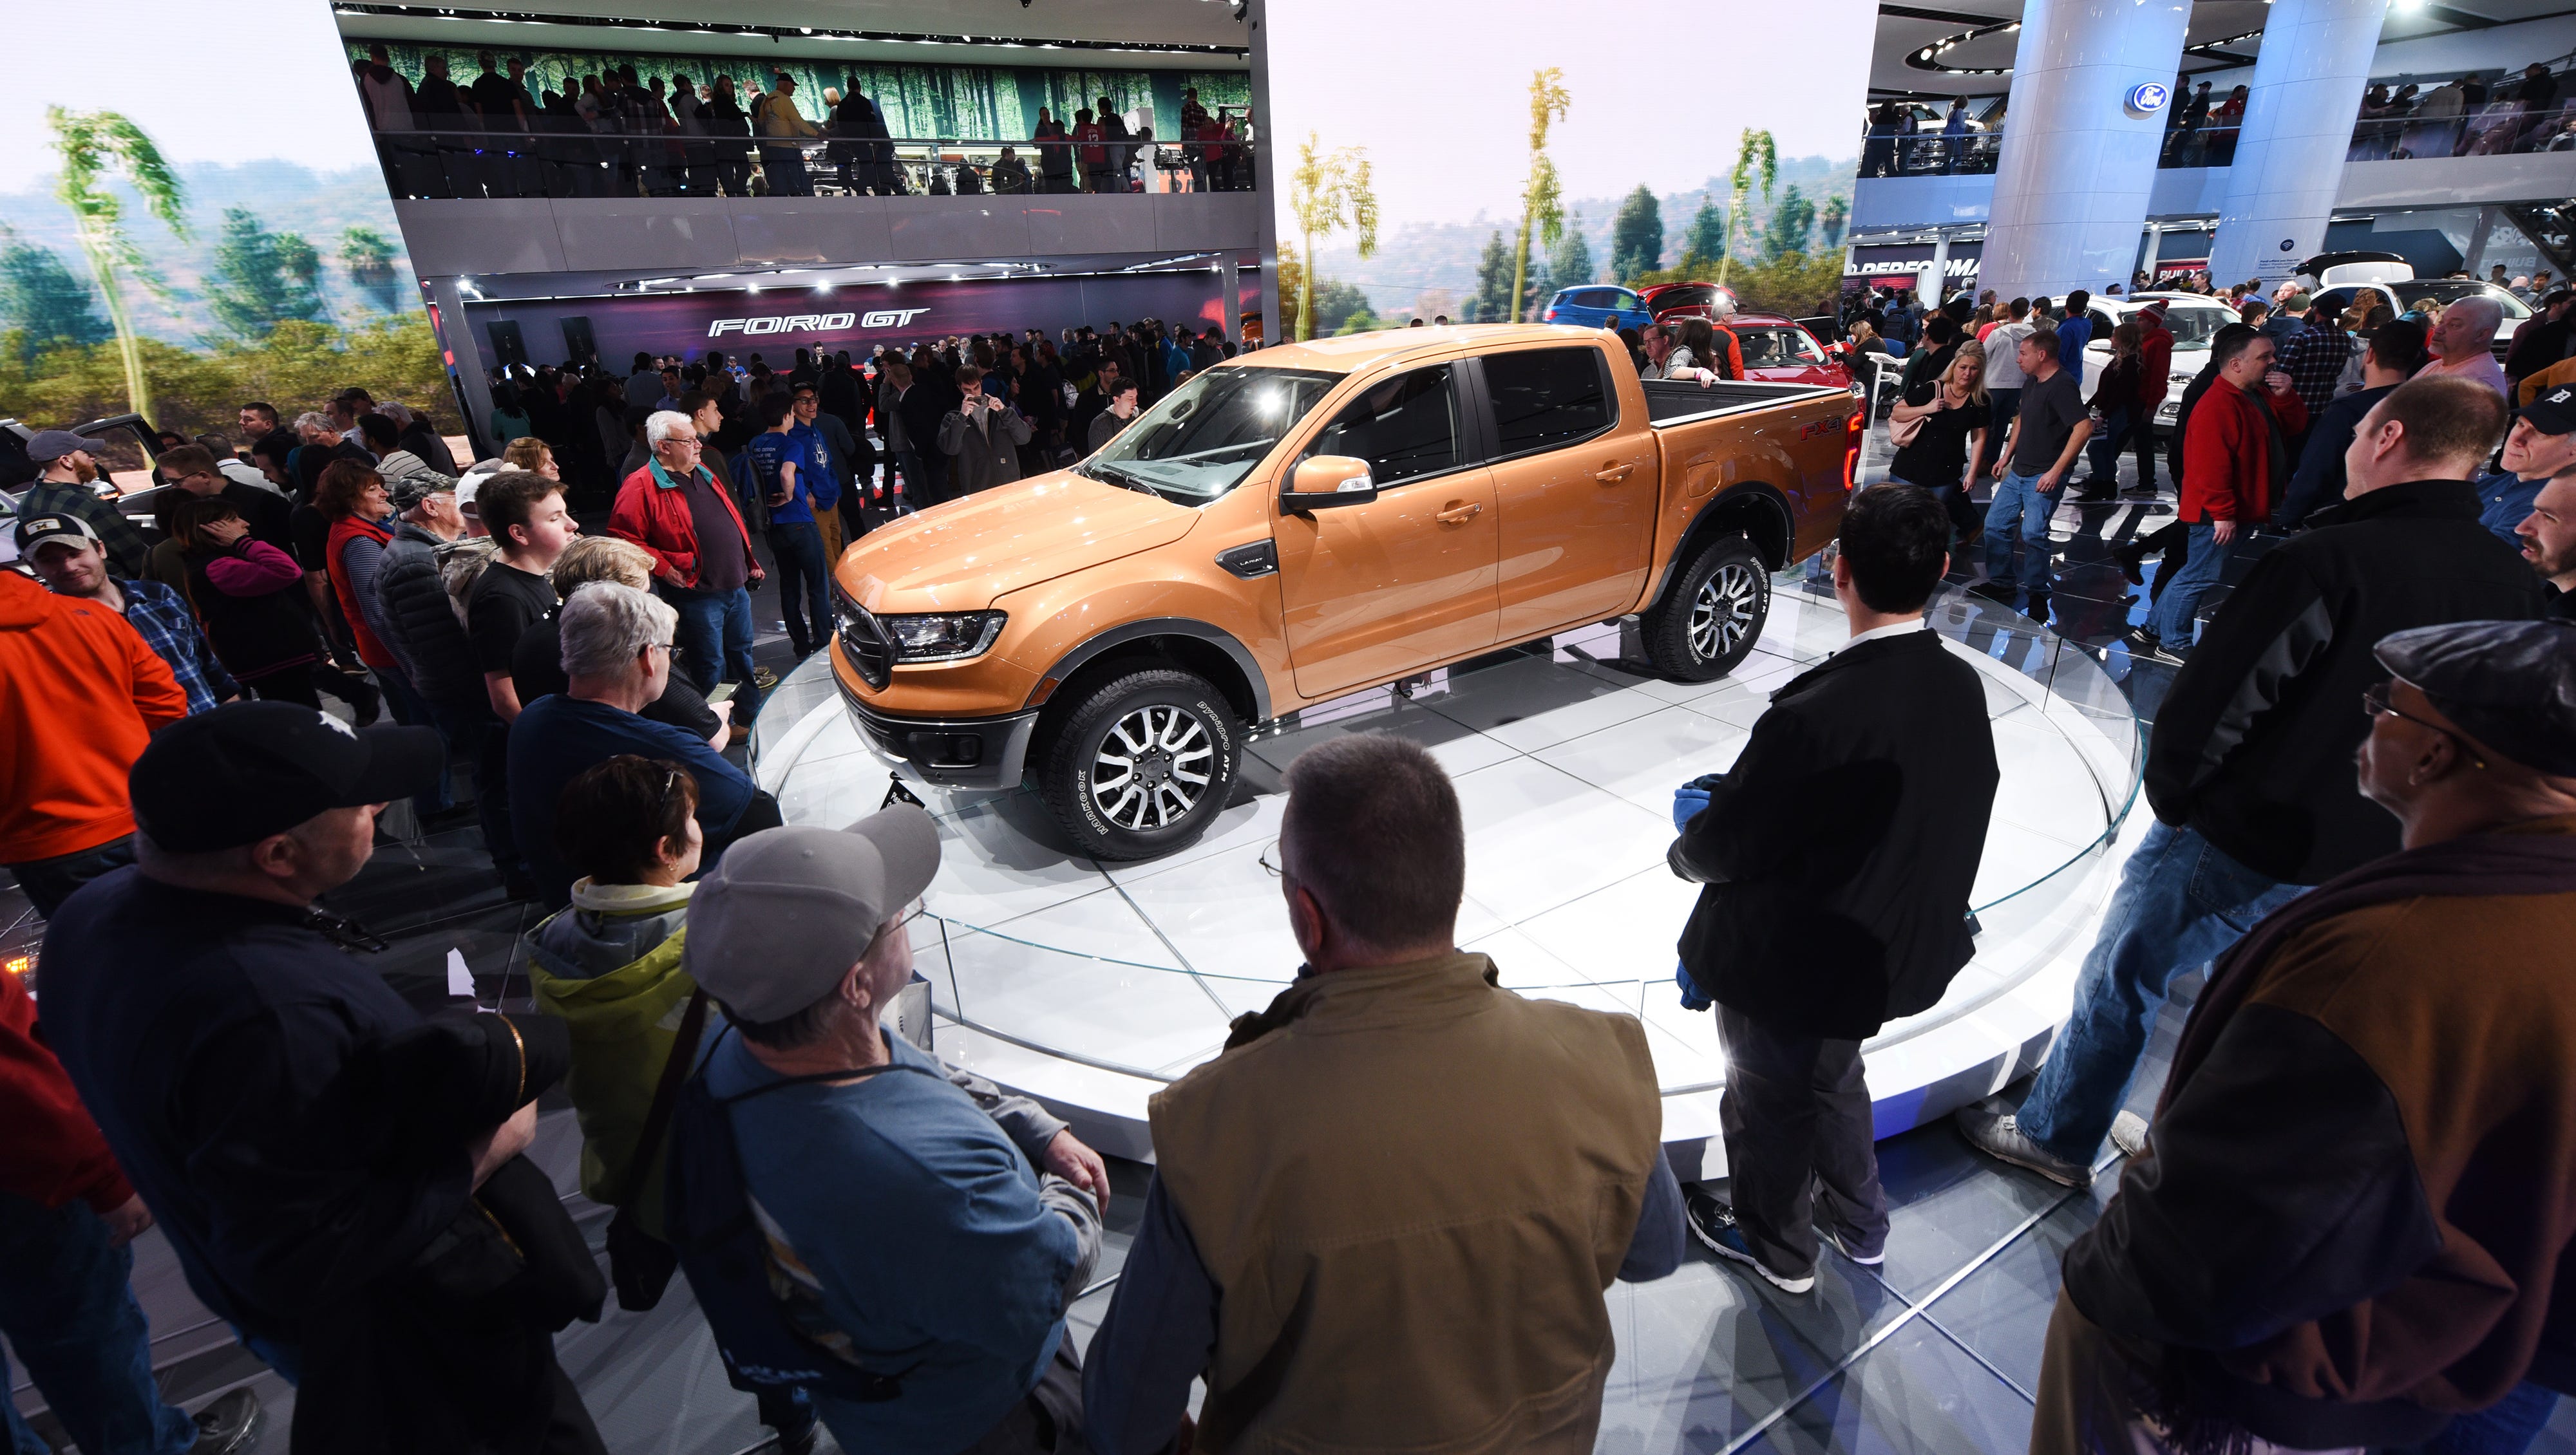 People look at the All-New Ford Ranger pick up on display at Cobo Center on Saturday January 20, 2018 for the first public day for the North American International Auto Show